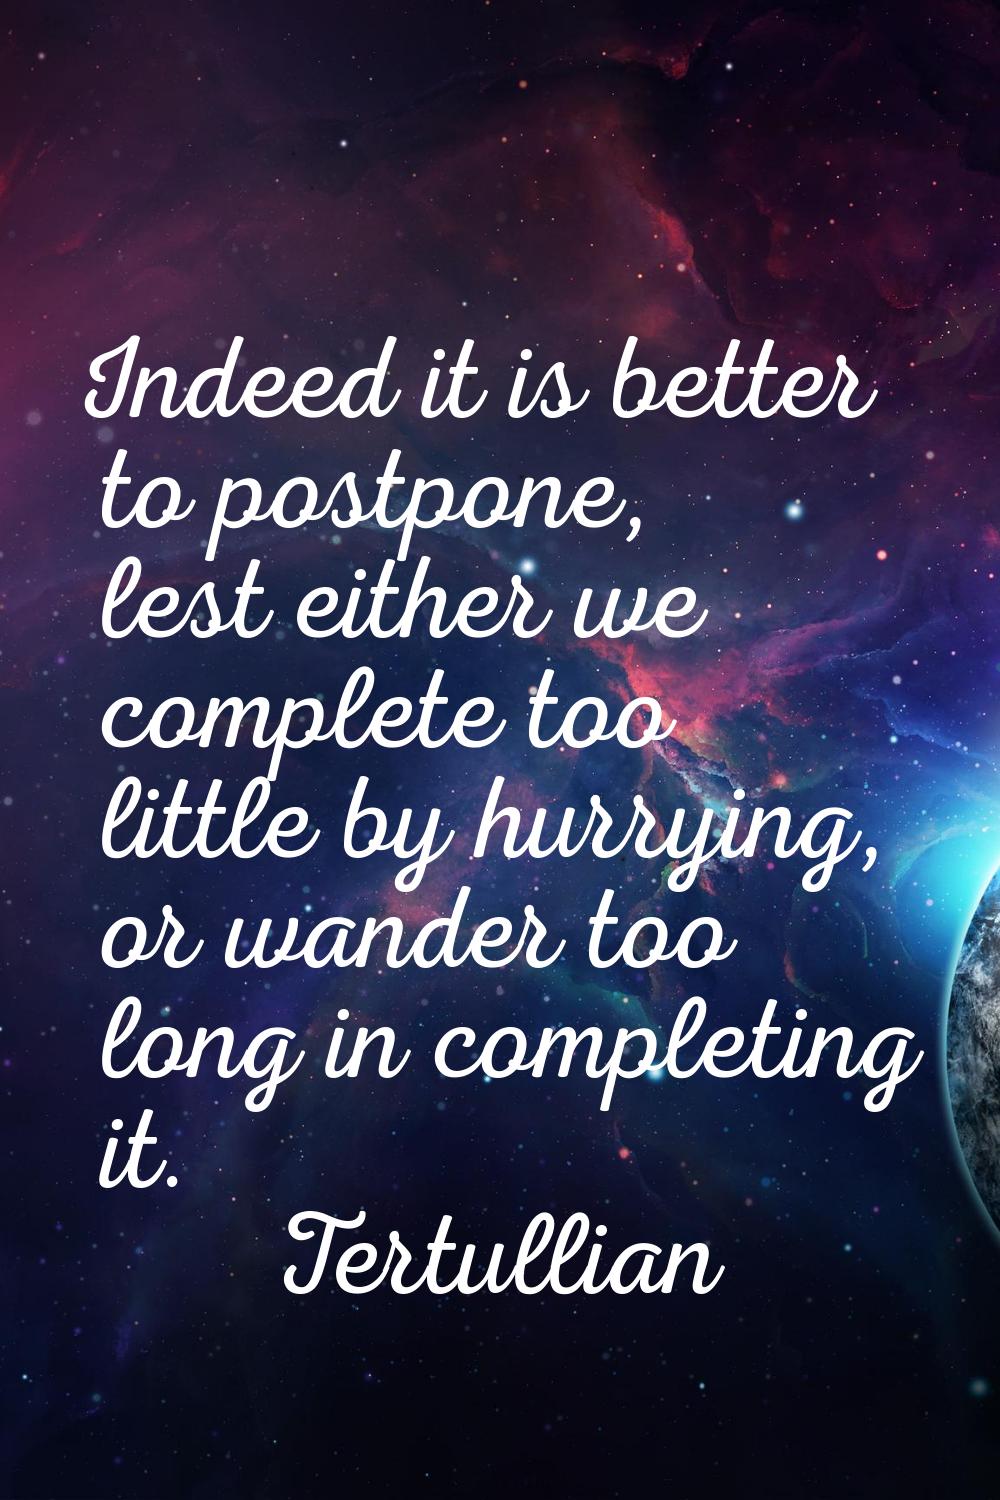 Indeed it is better to postpone, lest either we complete too little by hurrying, or wander too long